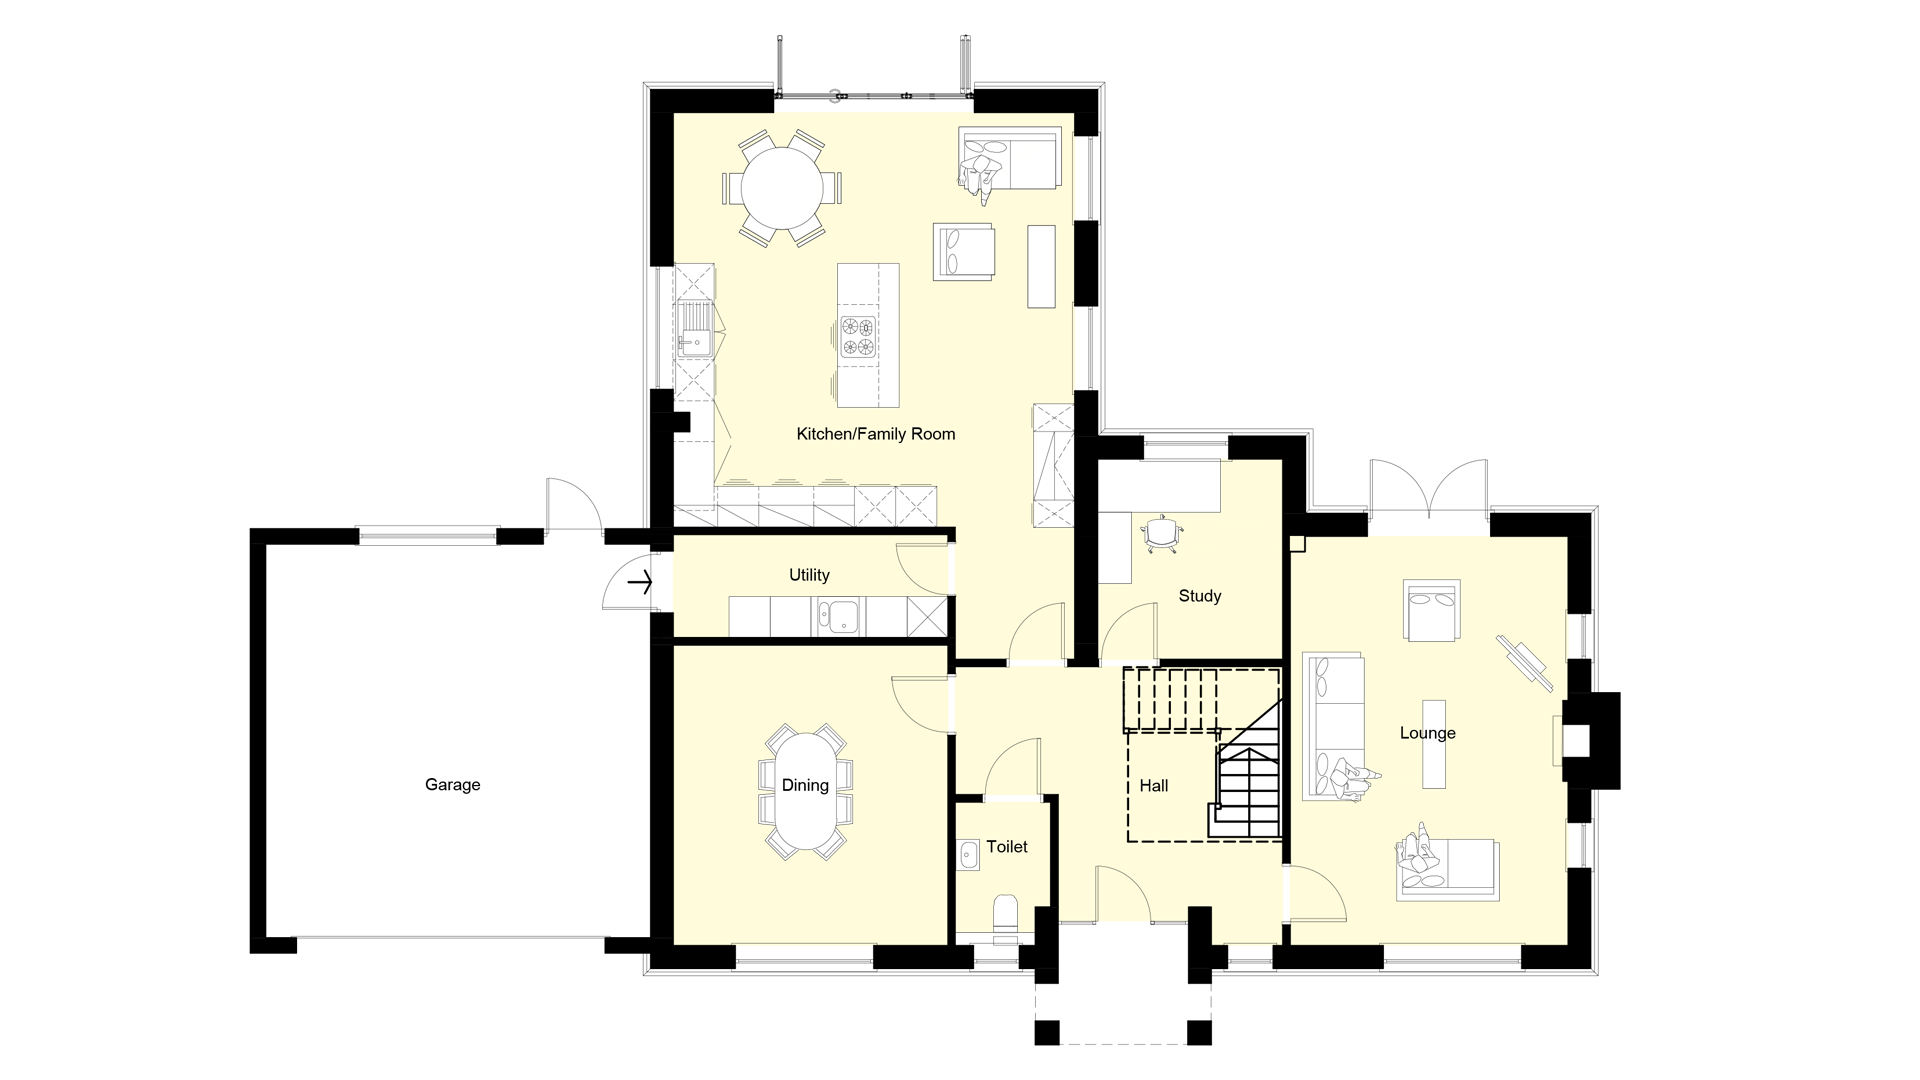 Layout of the ground floor at Weavers park development.